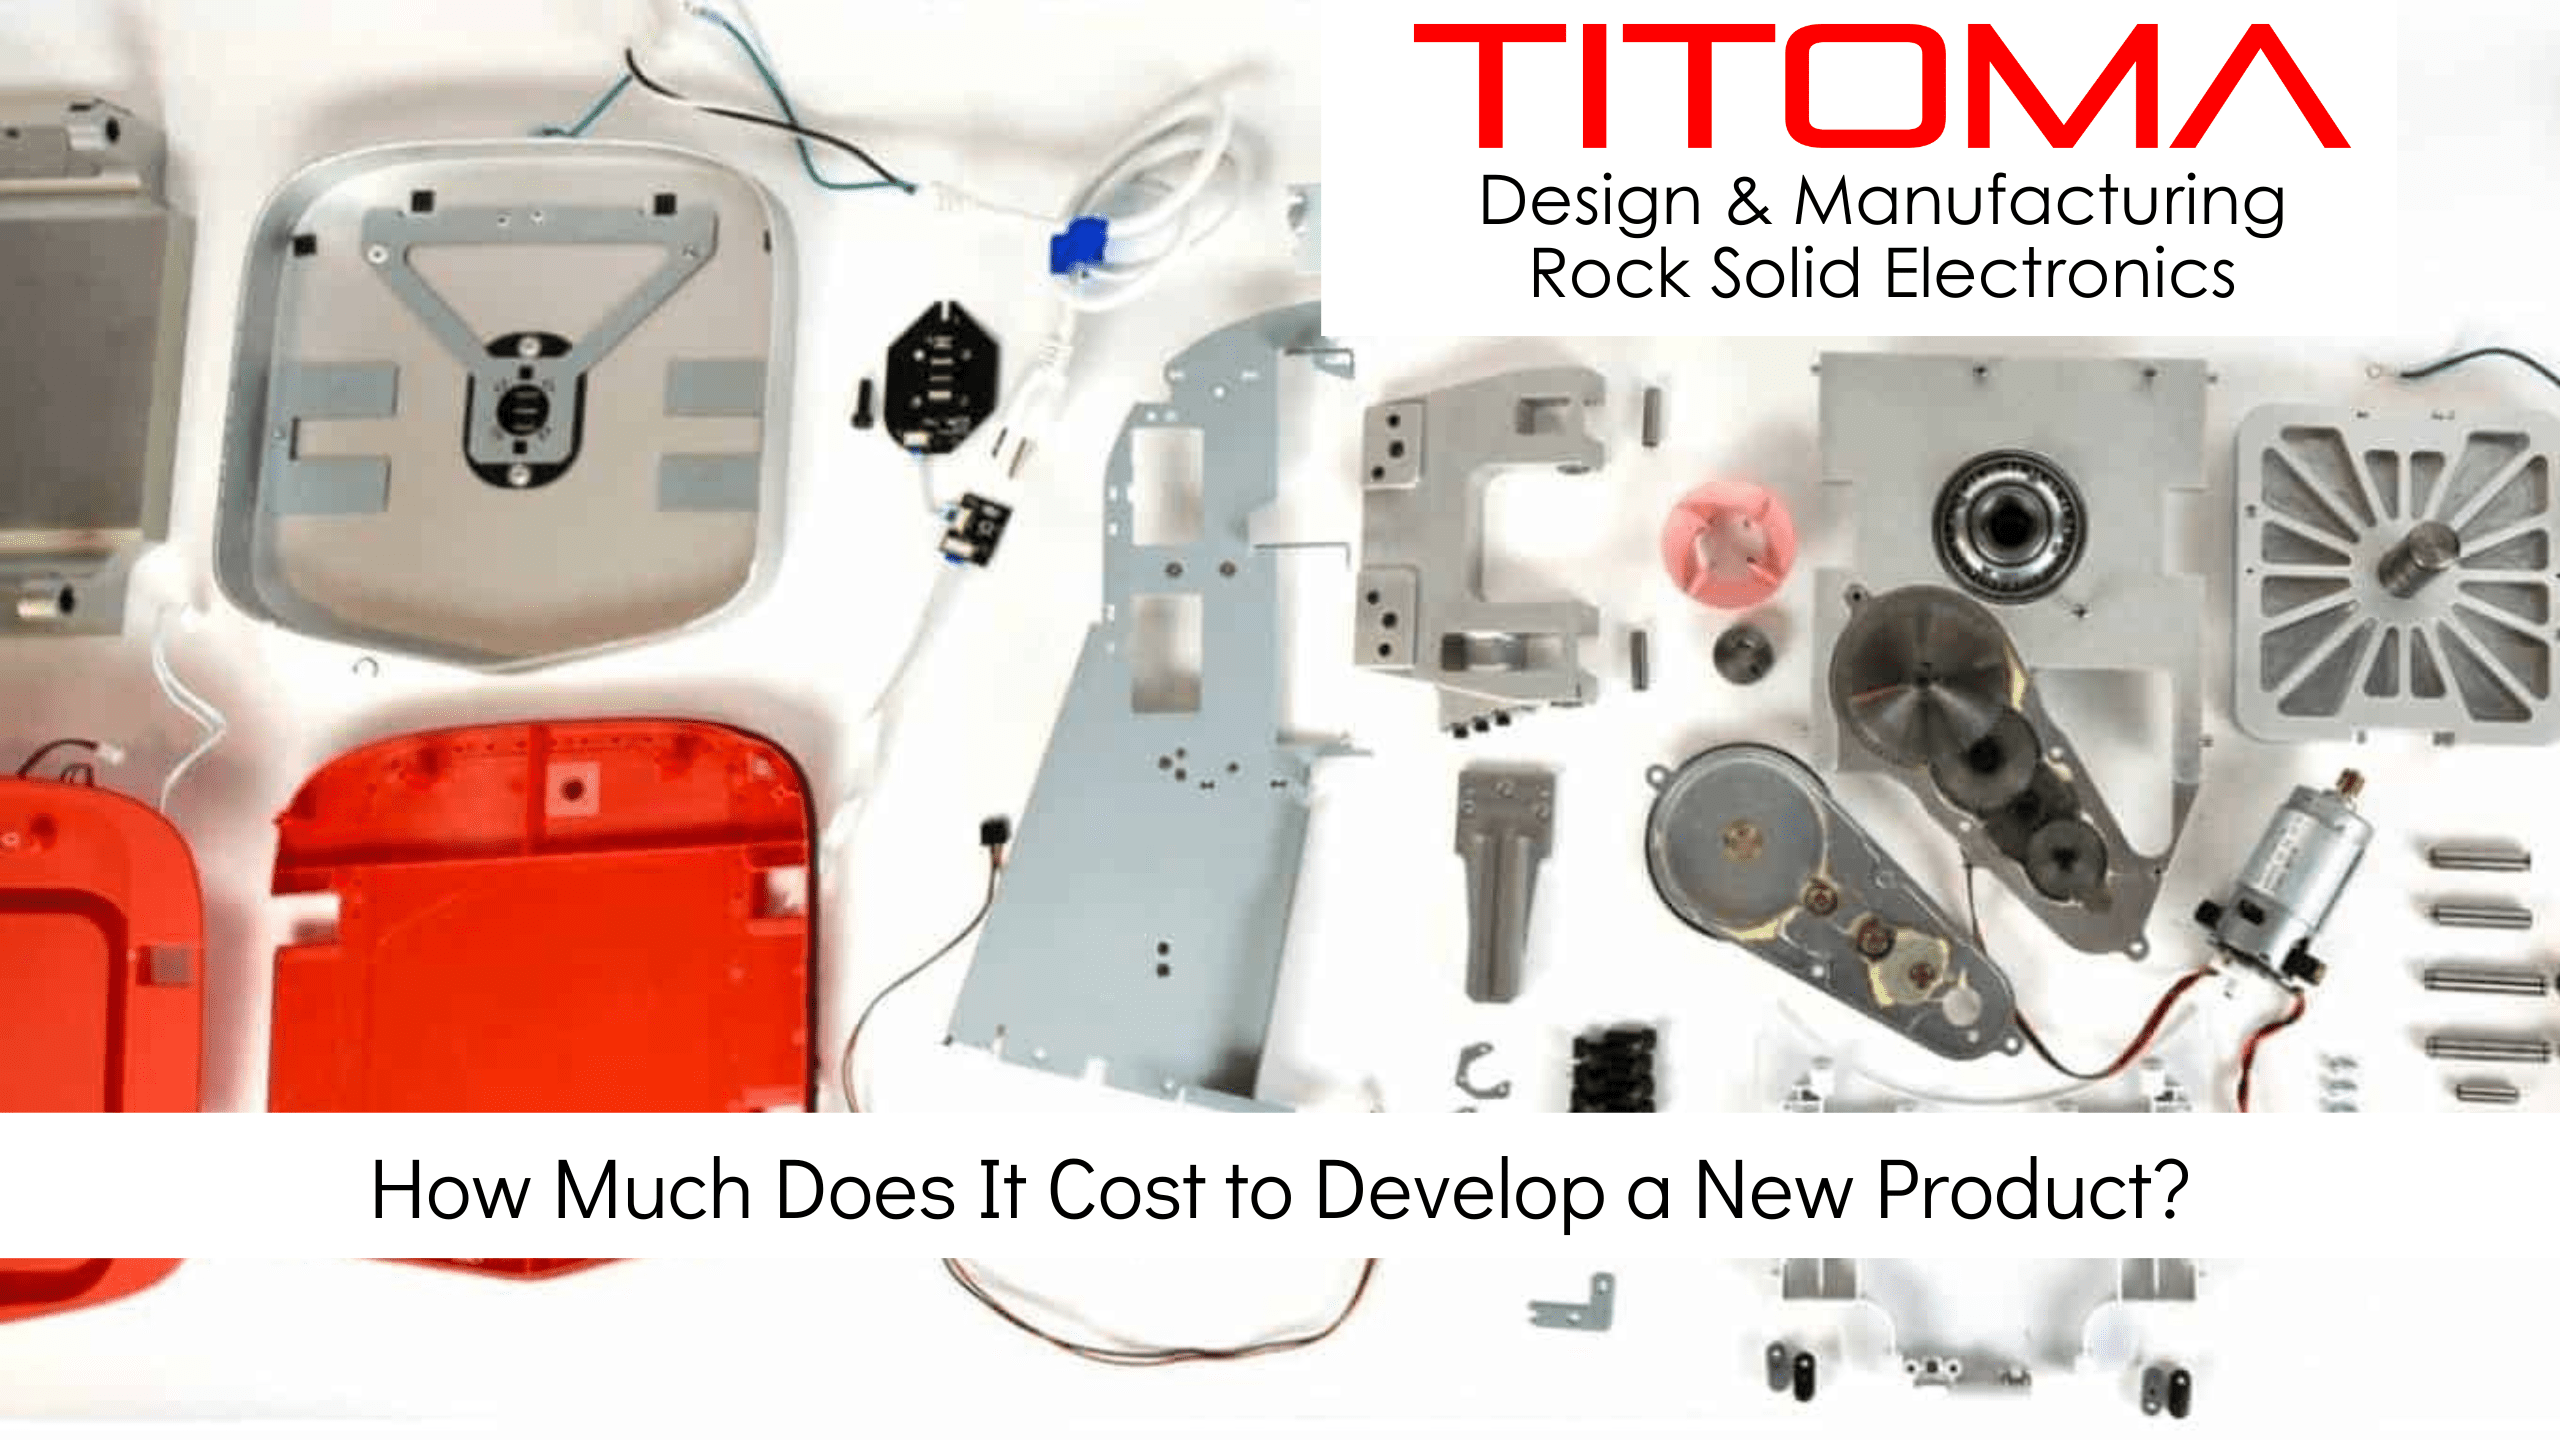 How much does it cost to develop a new product?